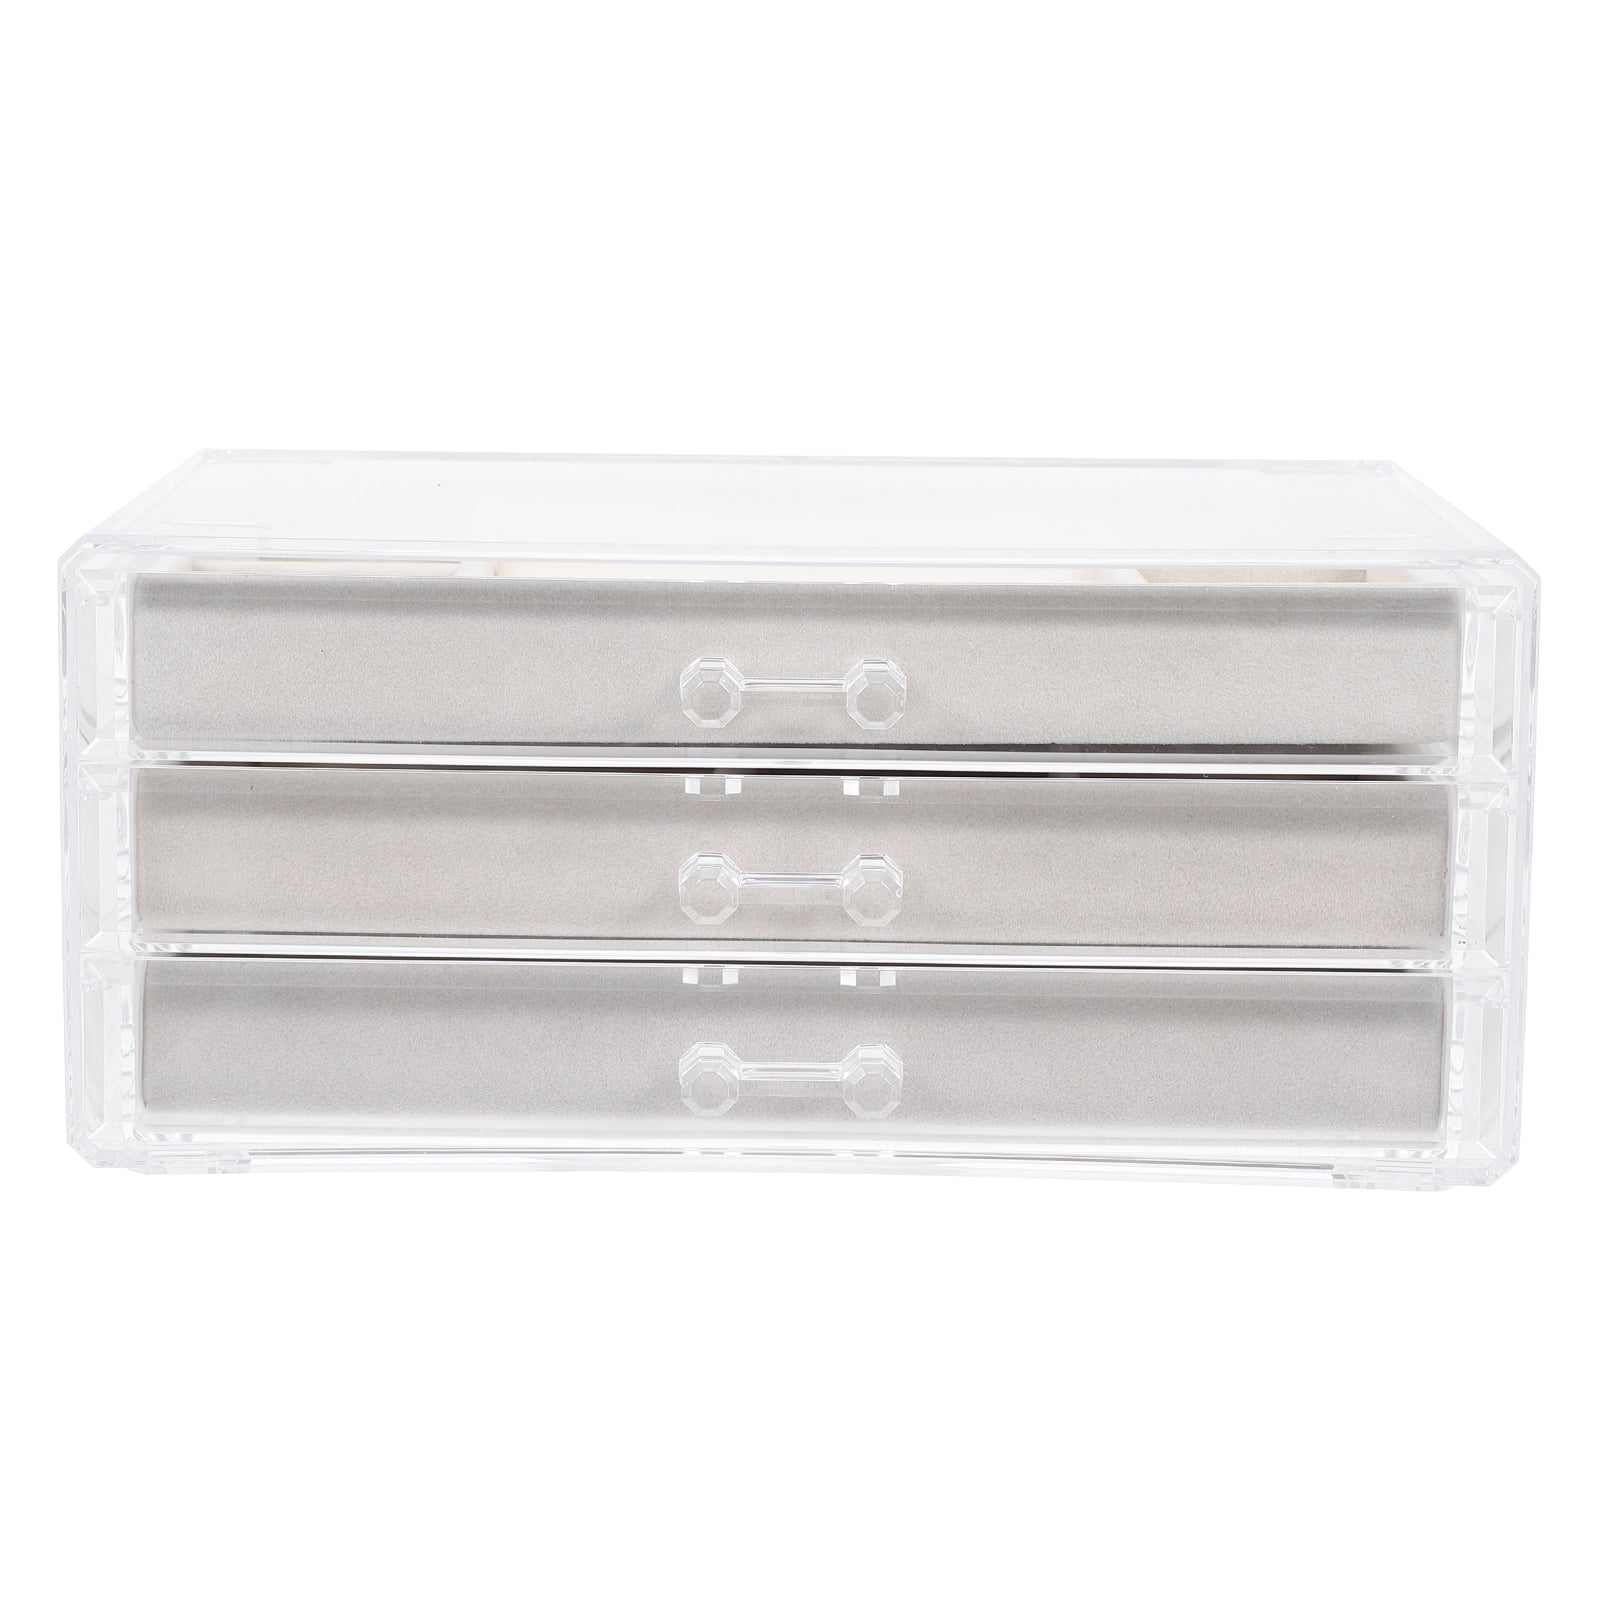 EEEkit 36 Slots Jewelry Organizer, Plastic Clear Jewelry Box with Movable  Dividers, Plastic Organizer Box Jewelry Storage Container for Beads Art DIY  Crafts Jewelry 